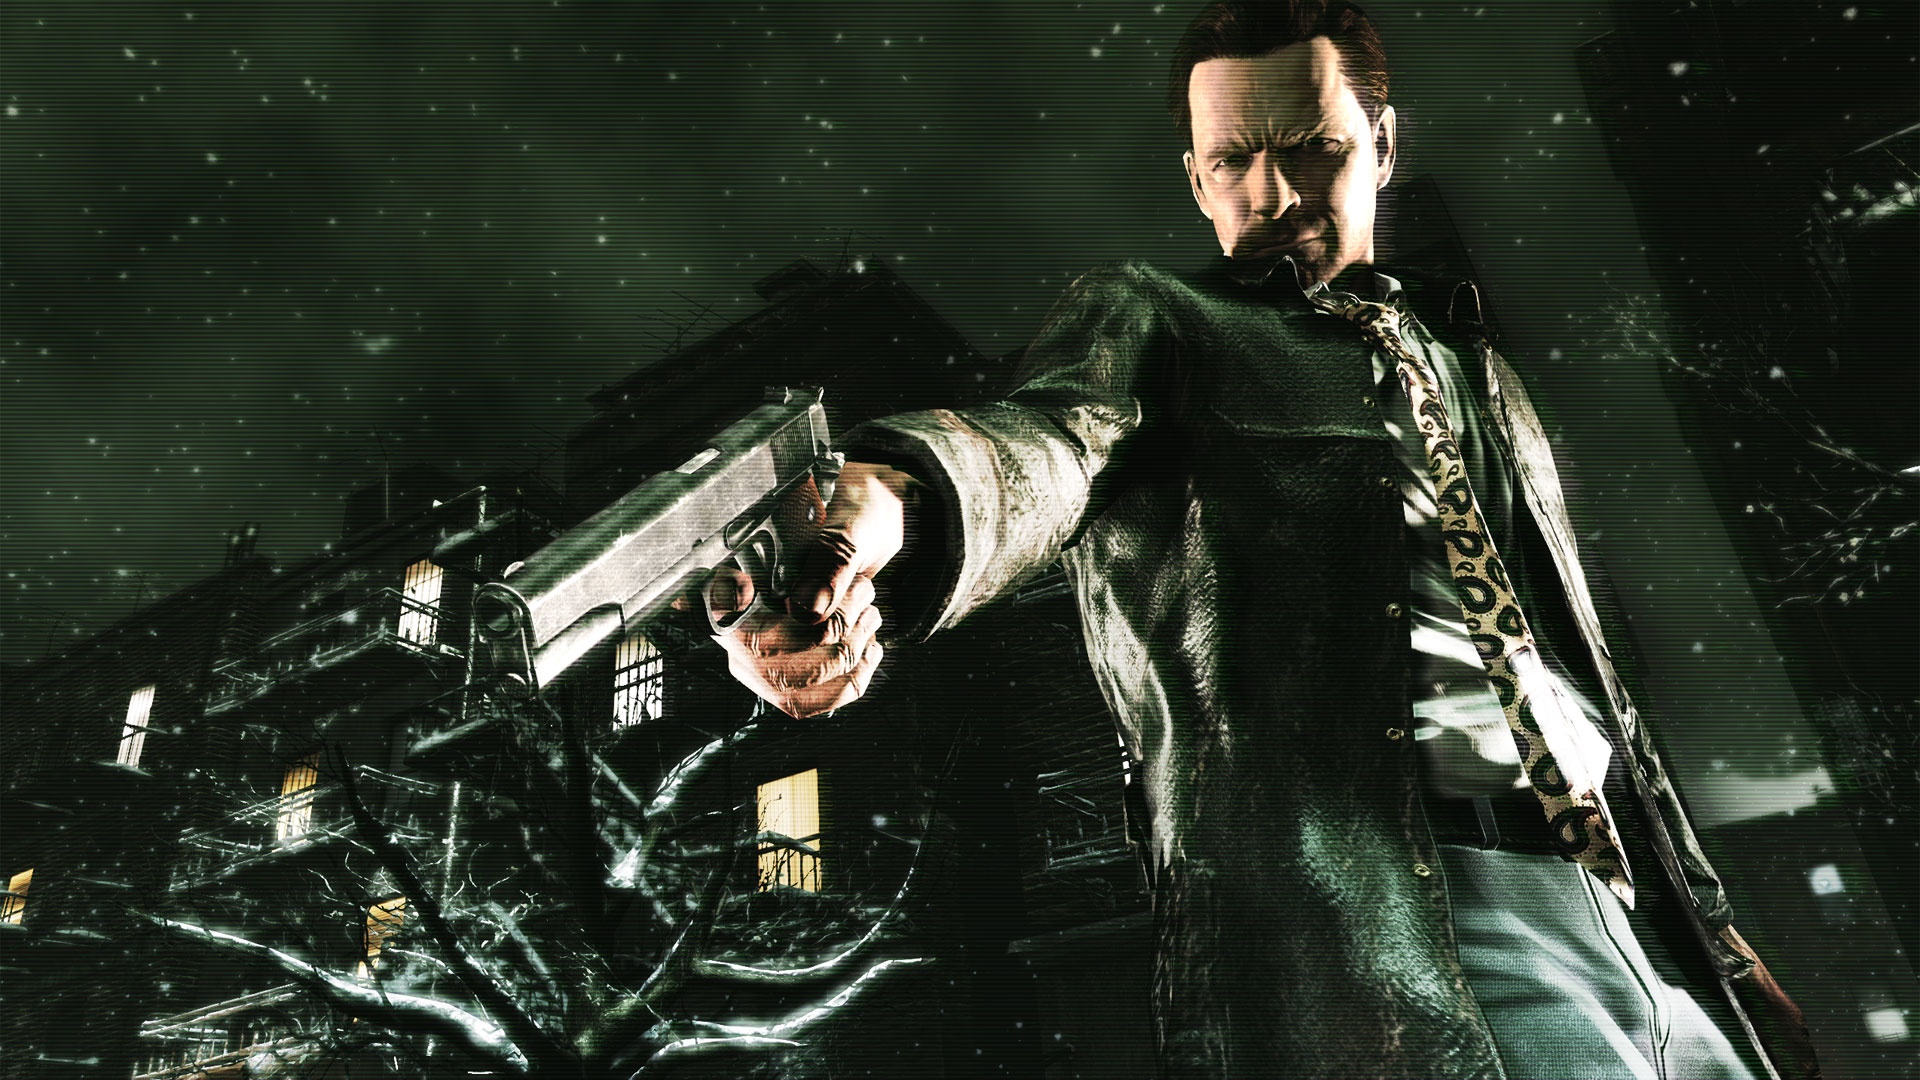 max payne 3 trainer all version